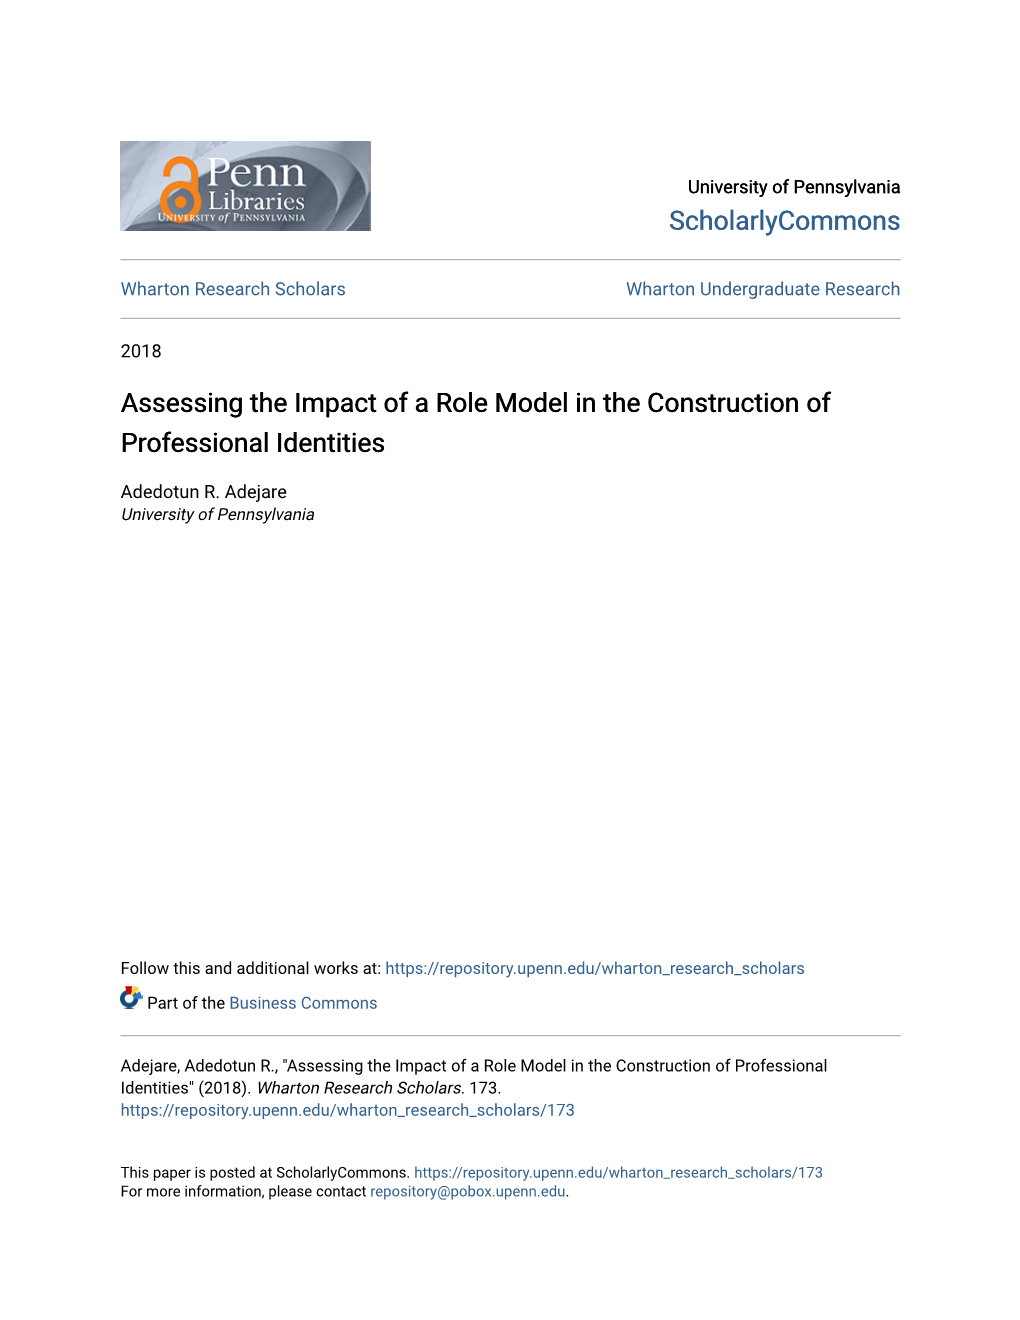 Assessing the Impact of a Role Model in the Construction of Professional Identities